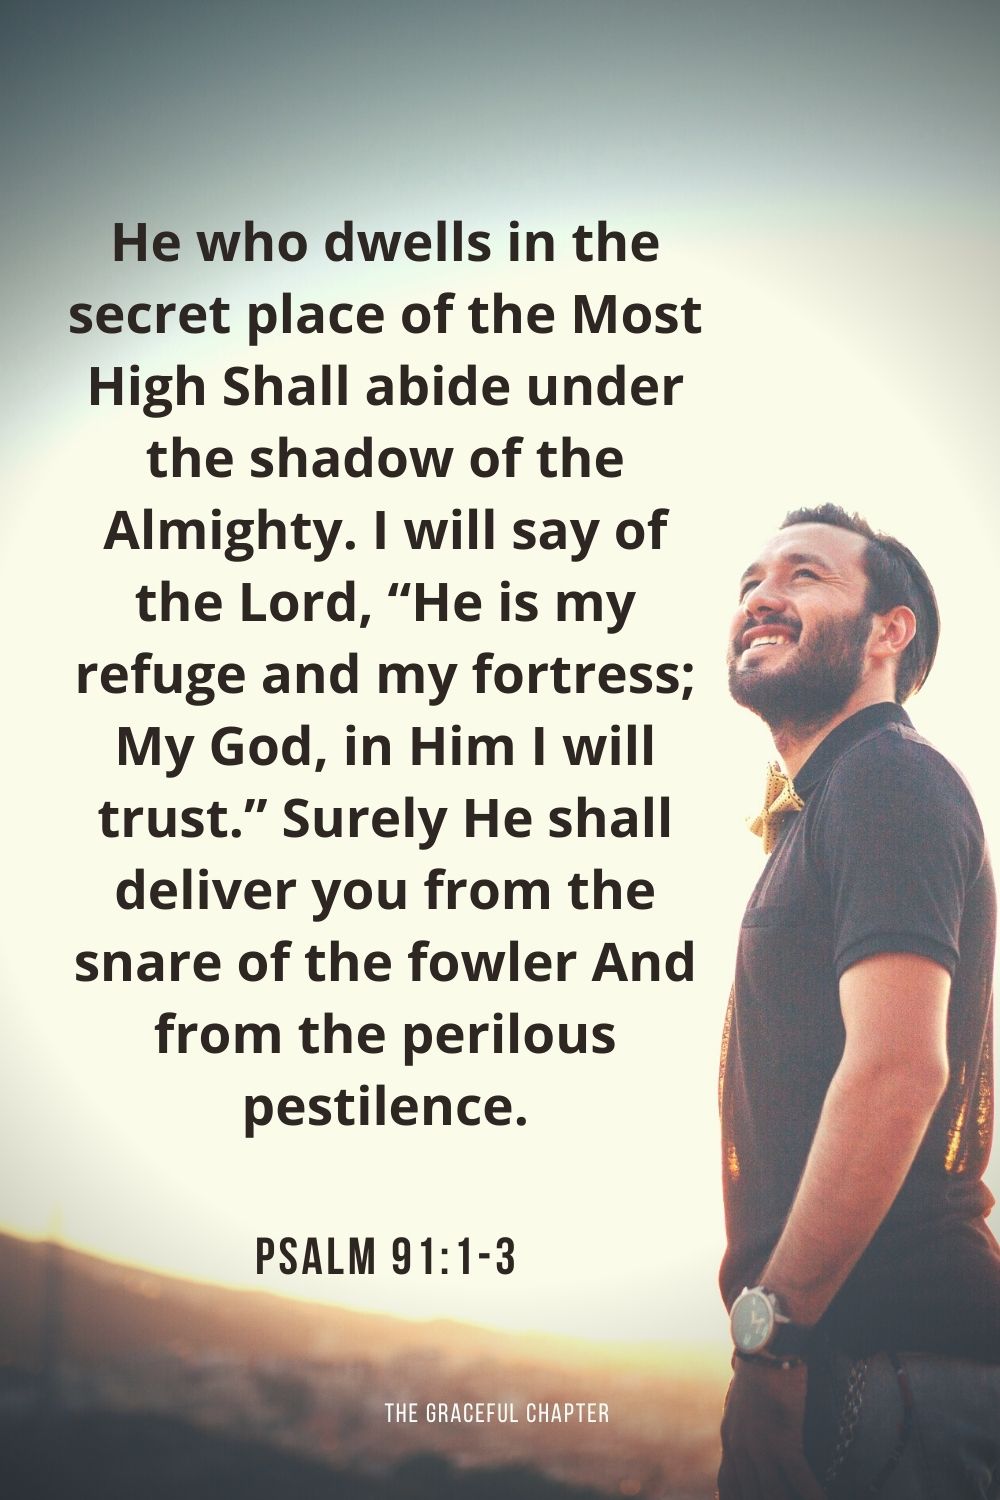 He who dwells in the secret place of the Most High Shall abide under the shadow of the Almighty. I will say of the Lord, “He is my refuge and my fortress; My God, in Him I will trust.” Surely He shall deliver you from the snare of the fowler And from the perilous pestilence. Psalm 91:1-3